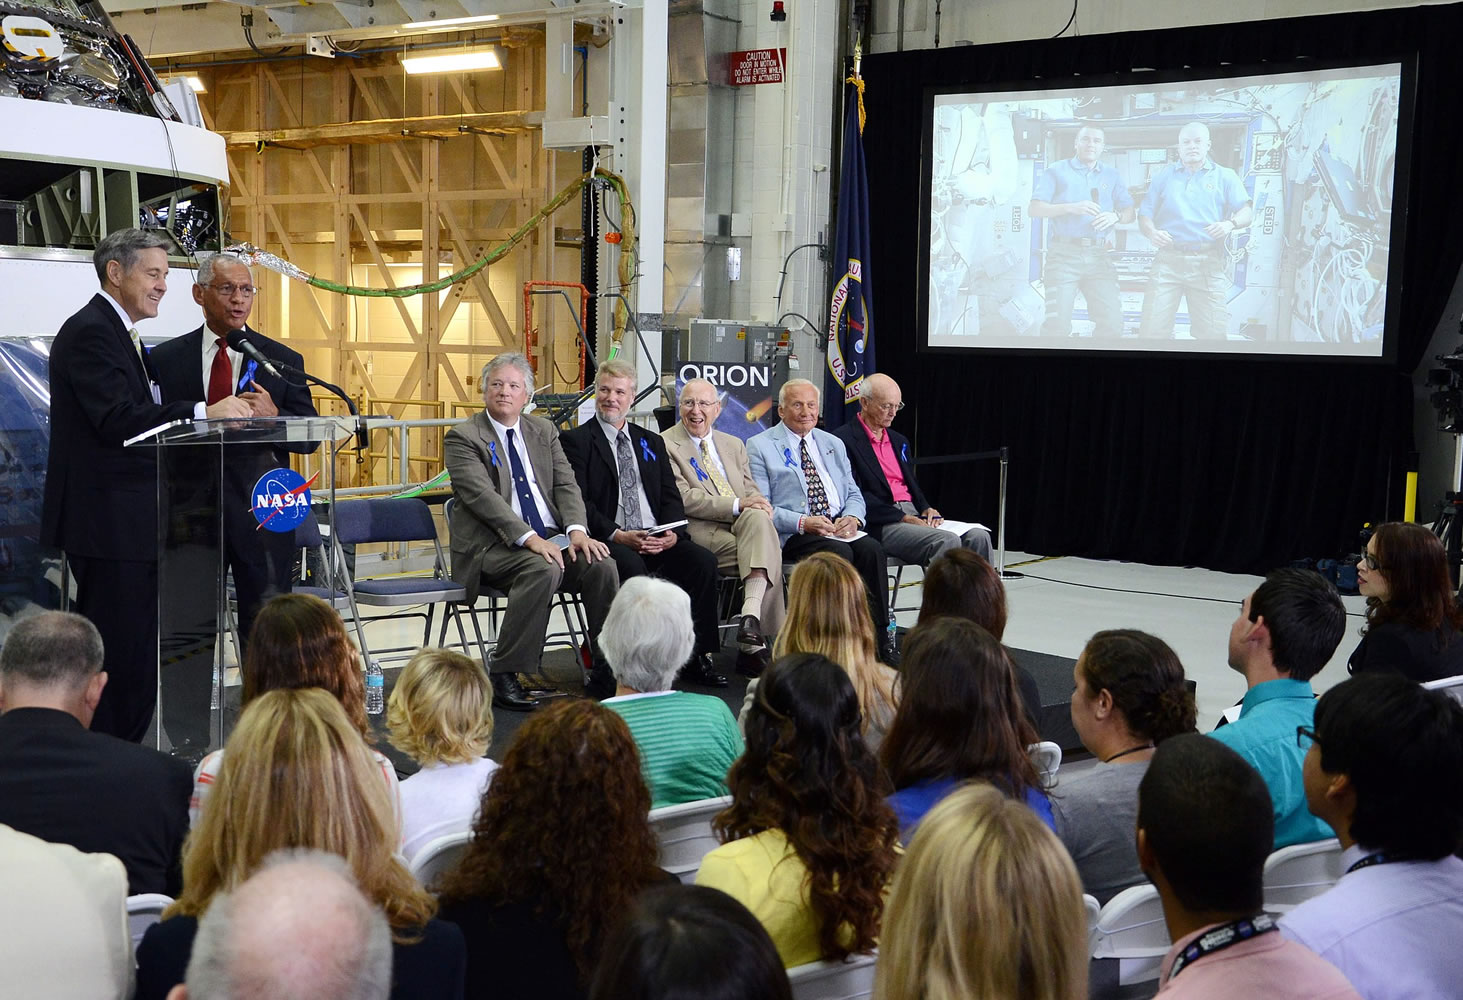 Kennedy Space Center Director Robert Cabana, left, and NASA Administrator Charles Bolden talk with International Space Station astronauts Steve Swanson and Reid Wiseman during a ceremony Monday in the Operations and Checkout building at Kennedy Space Center, Fla., to rename the building in astronaut Neil Armstrongu2019s honor.